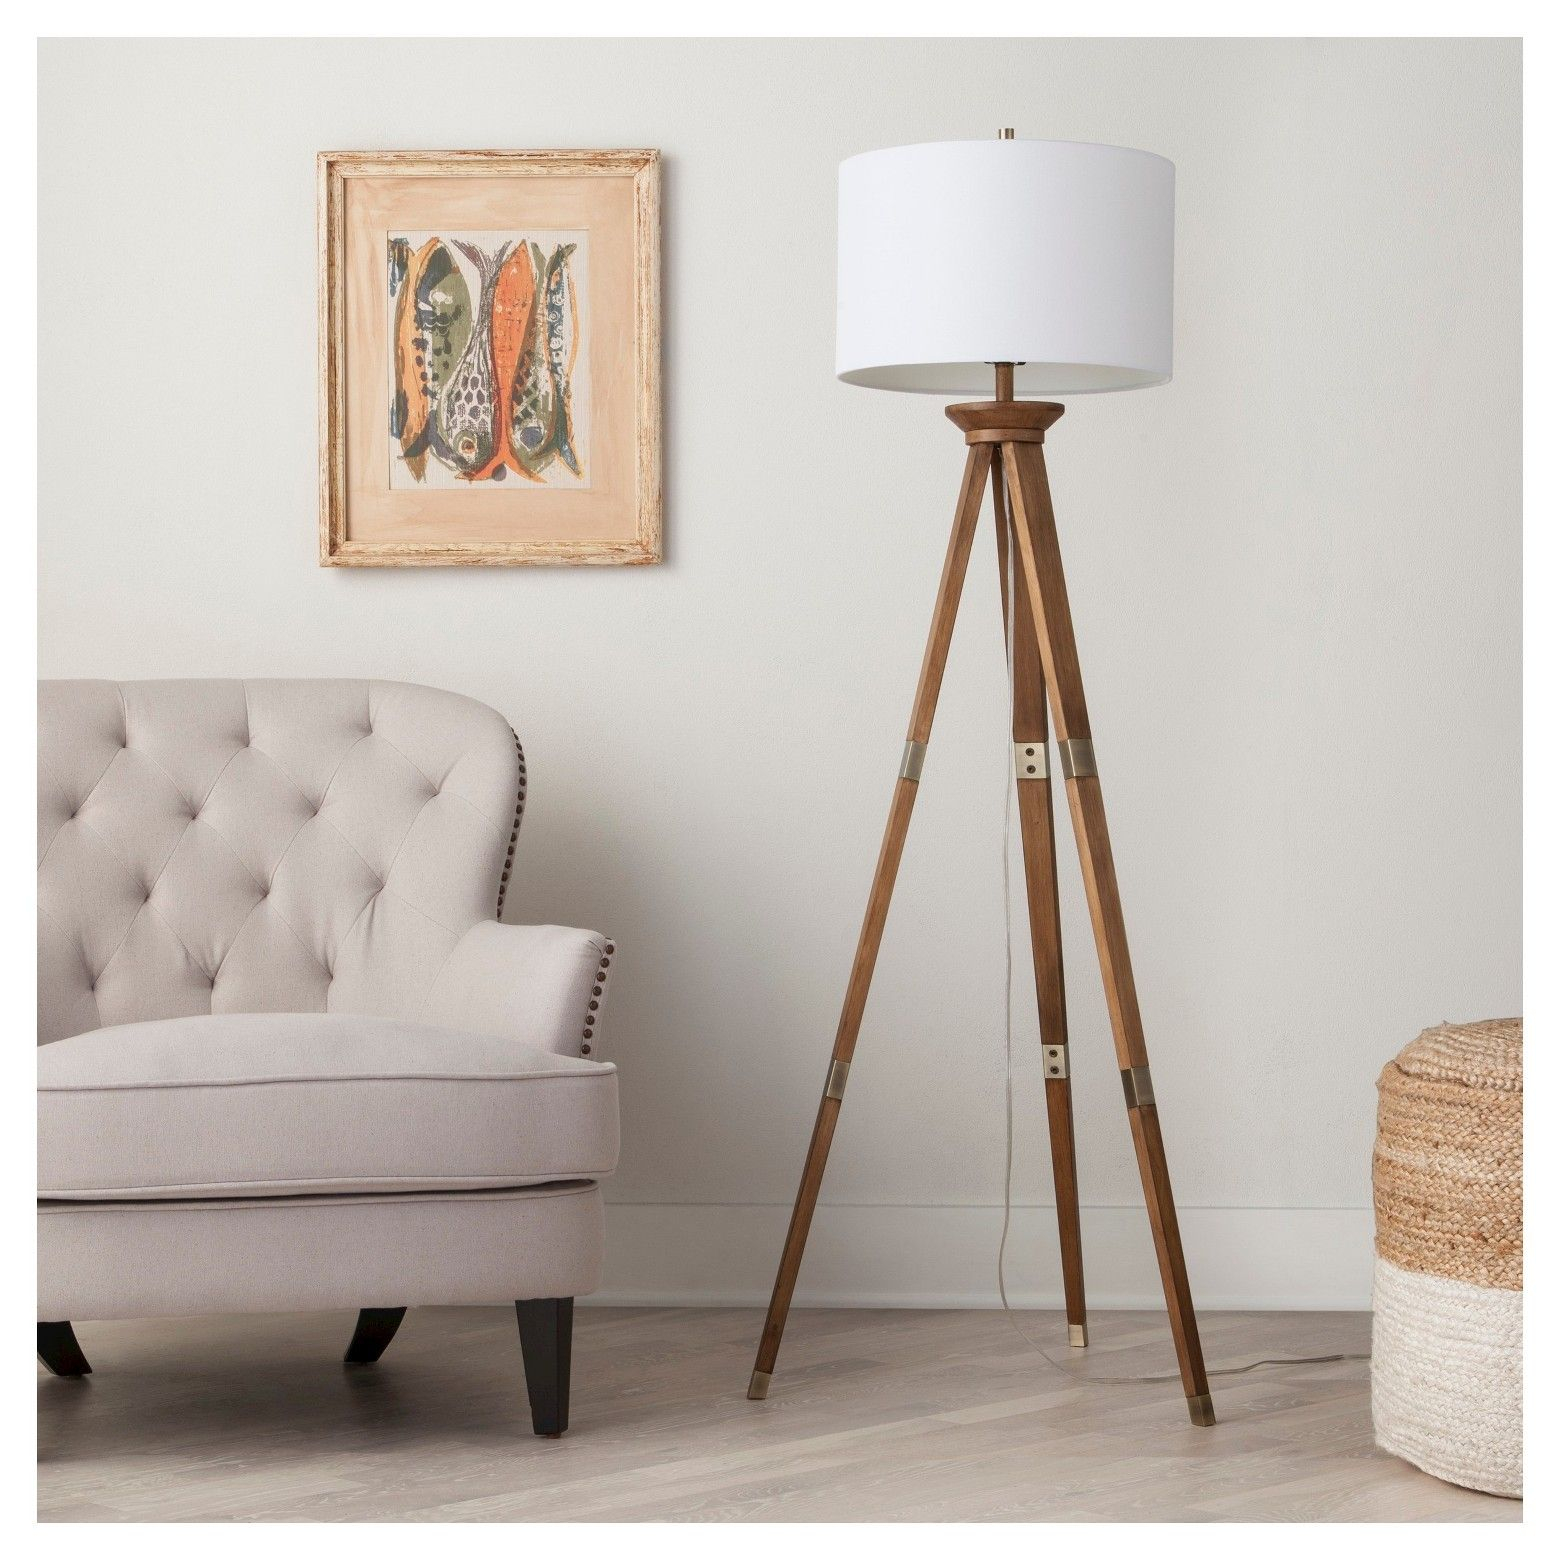 I Love This Lamp Wow My Lamp In The Living Room Doesnt regarding measurements 1560 X 1560